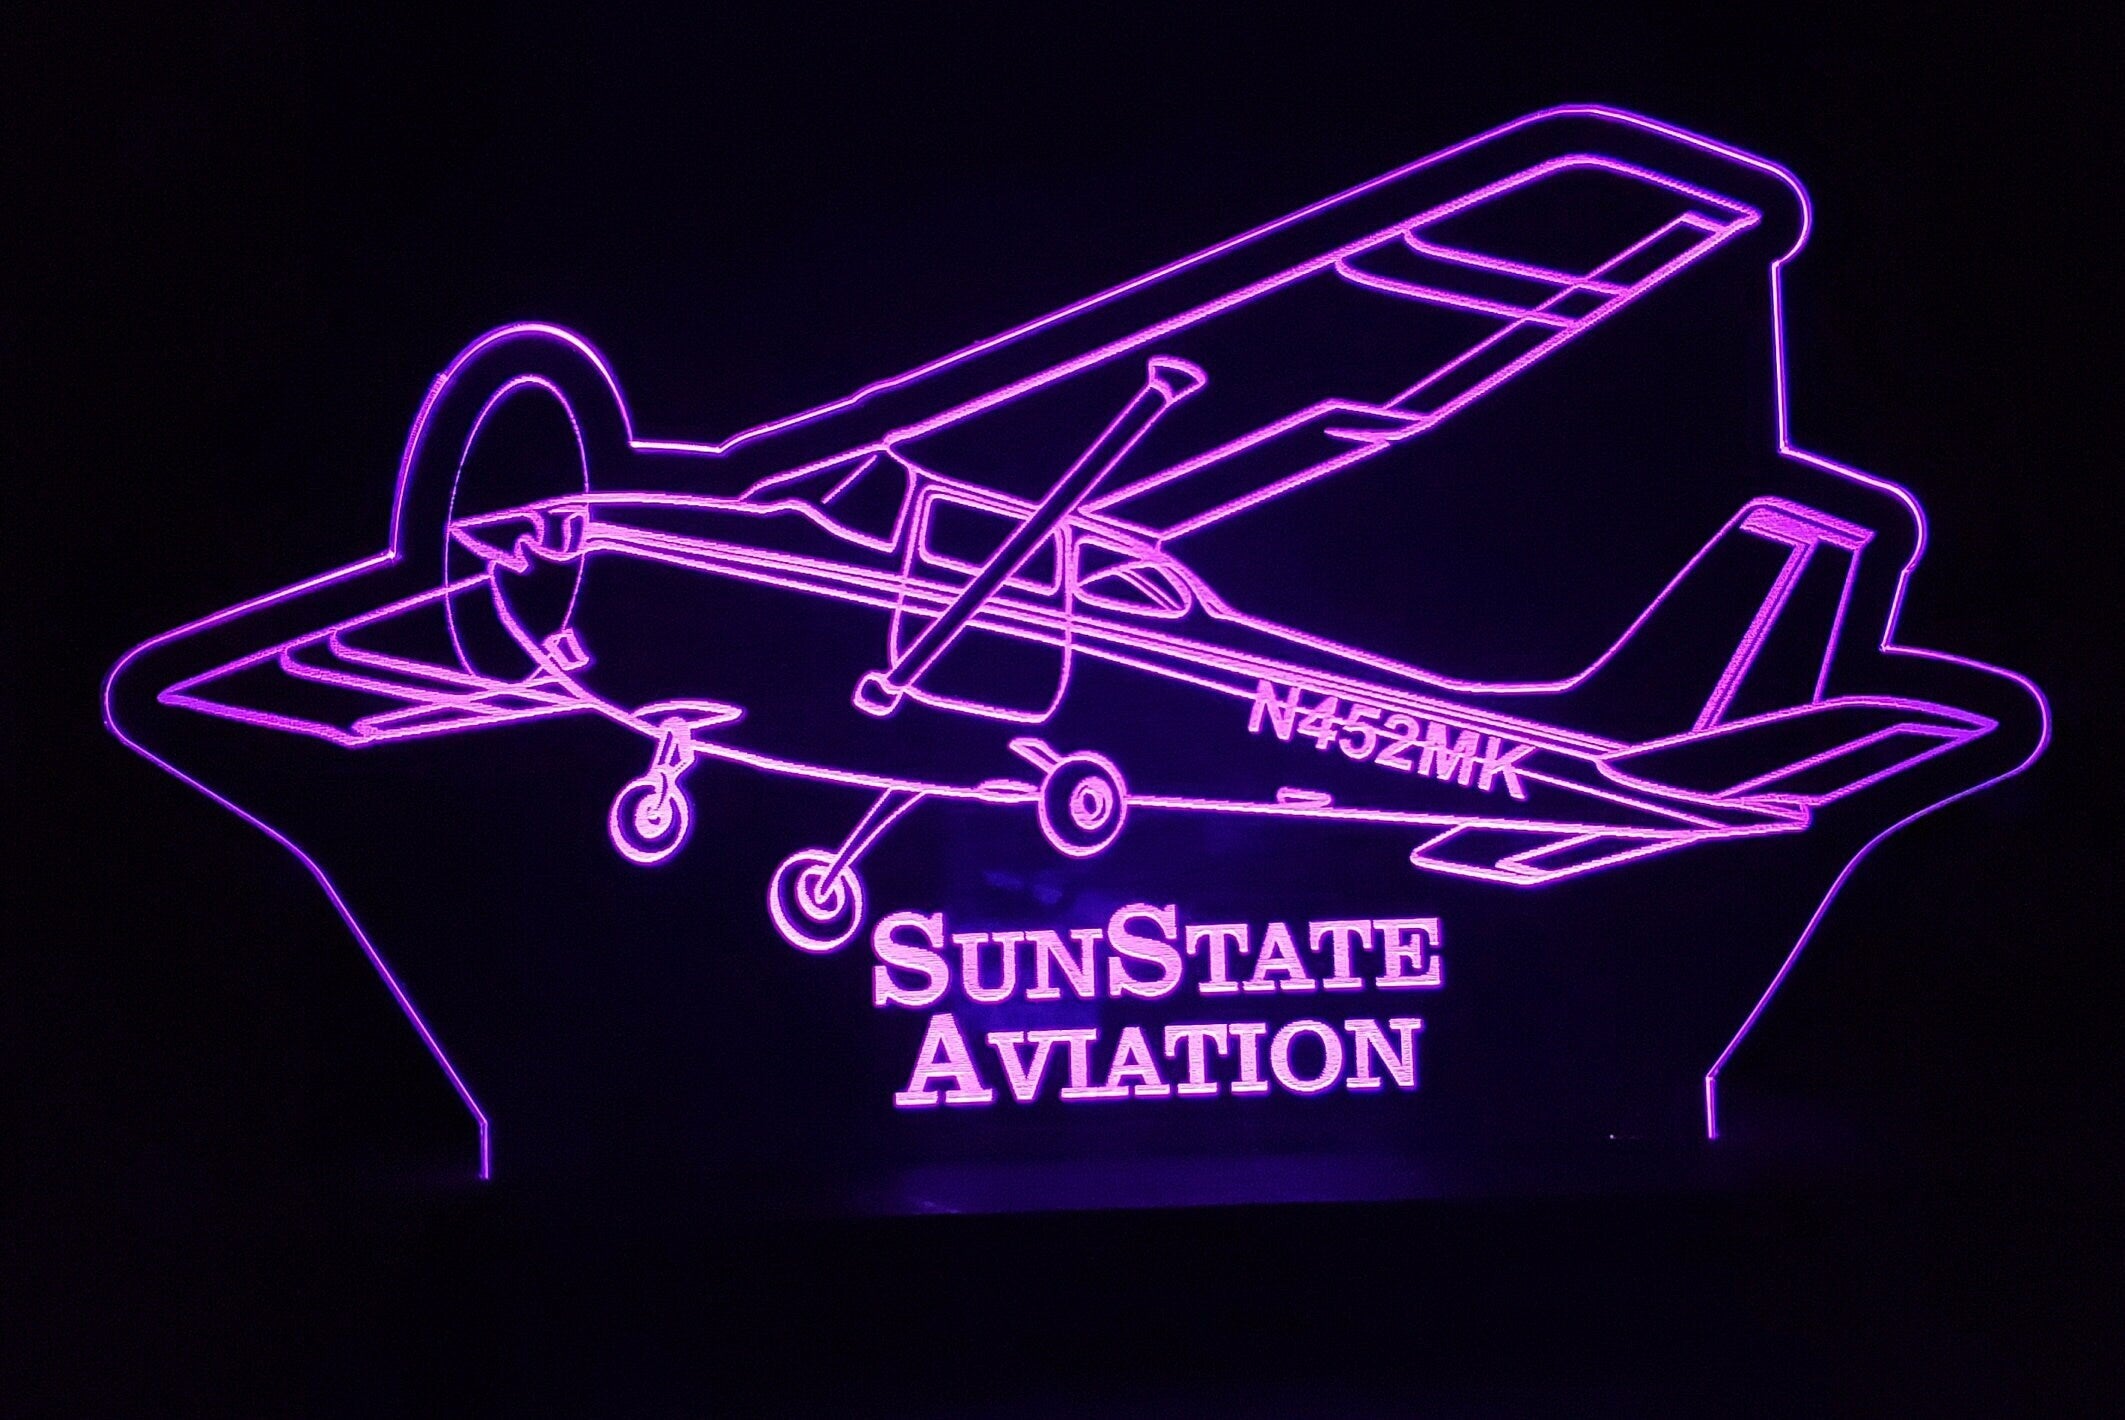 Cessna 172 LED light lamp/sign with customizable tail number and business name - Neon-like - Free shipping - Made in USA.